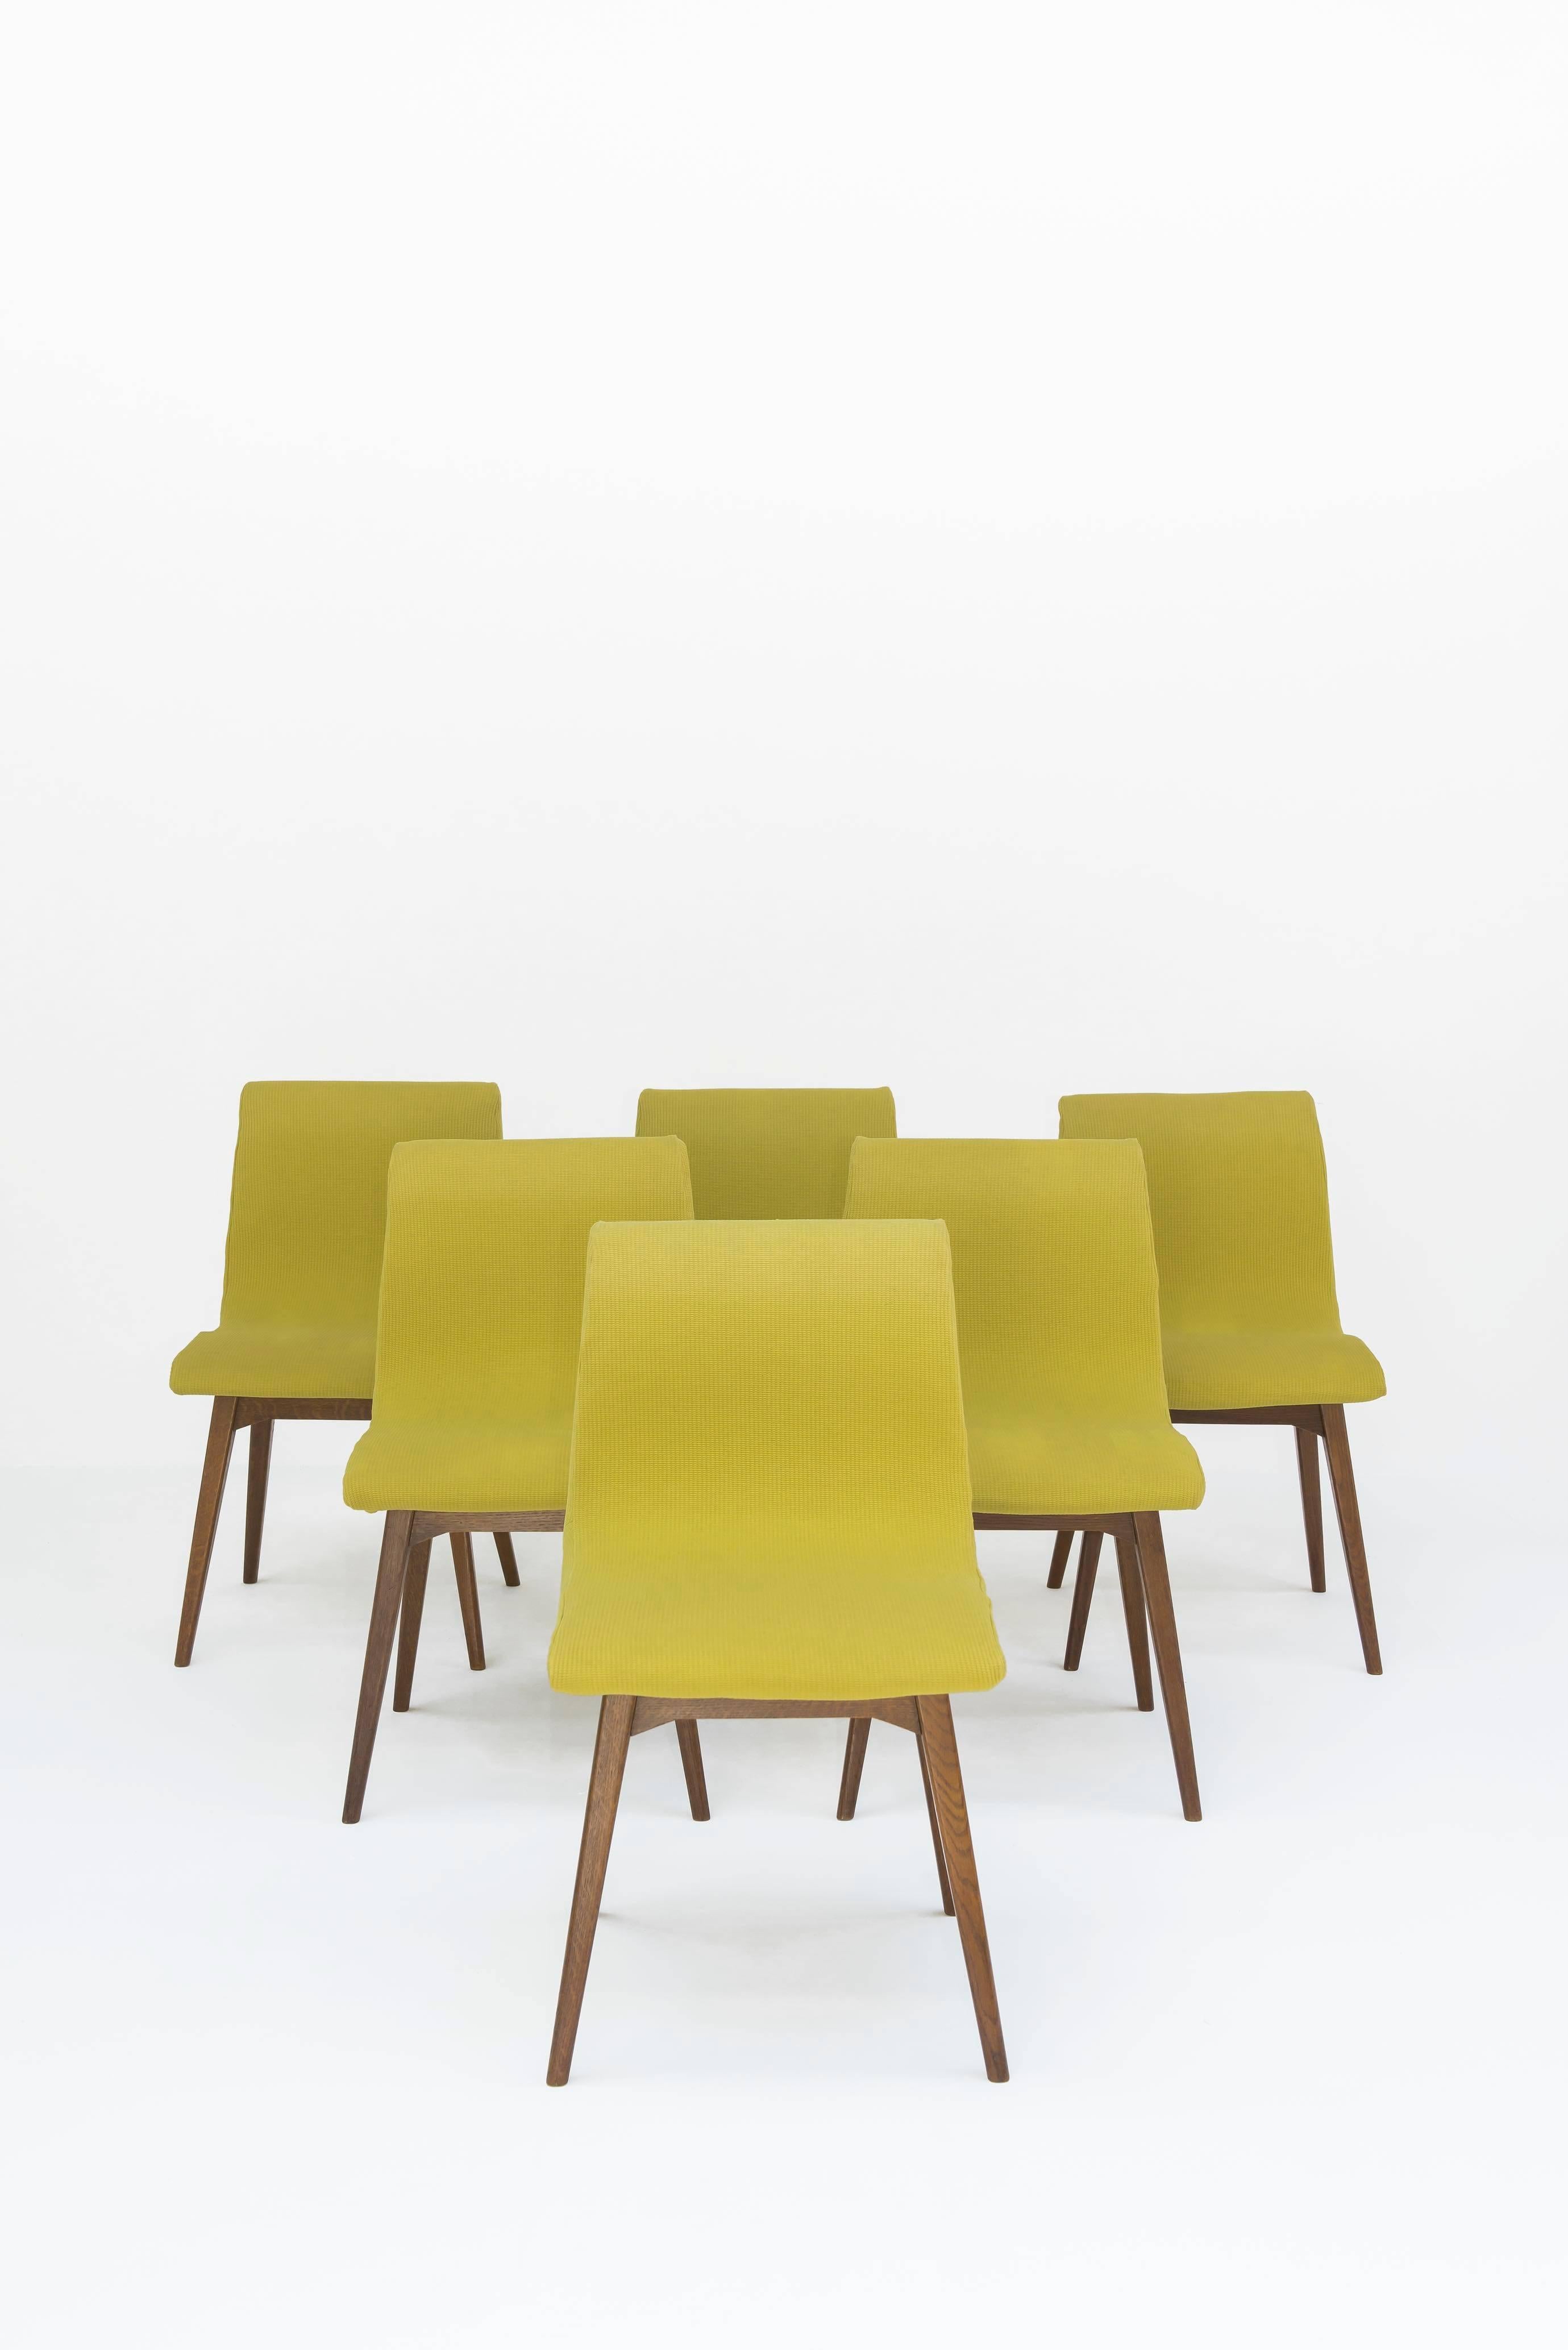 Set of six chairs C59 by René Jean Caillette (1919-2004).
Charron edition, 1960.